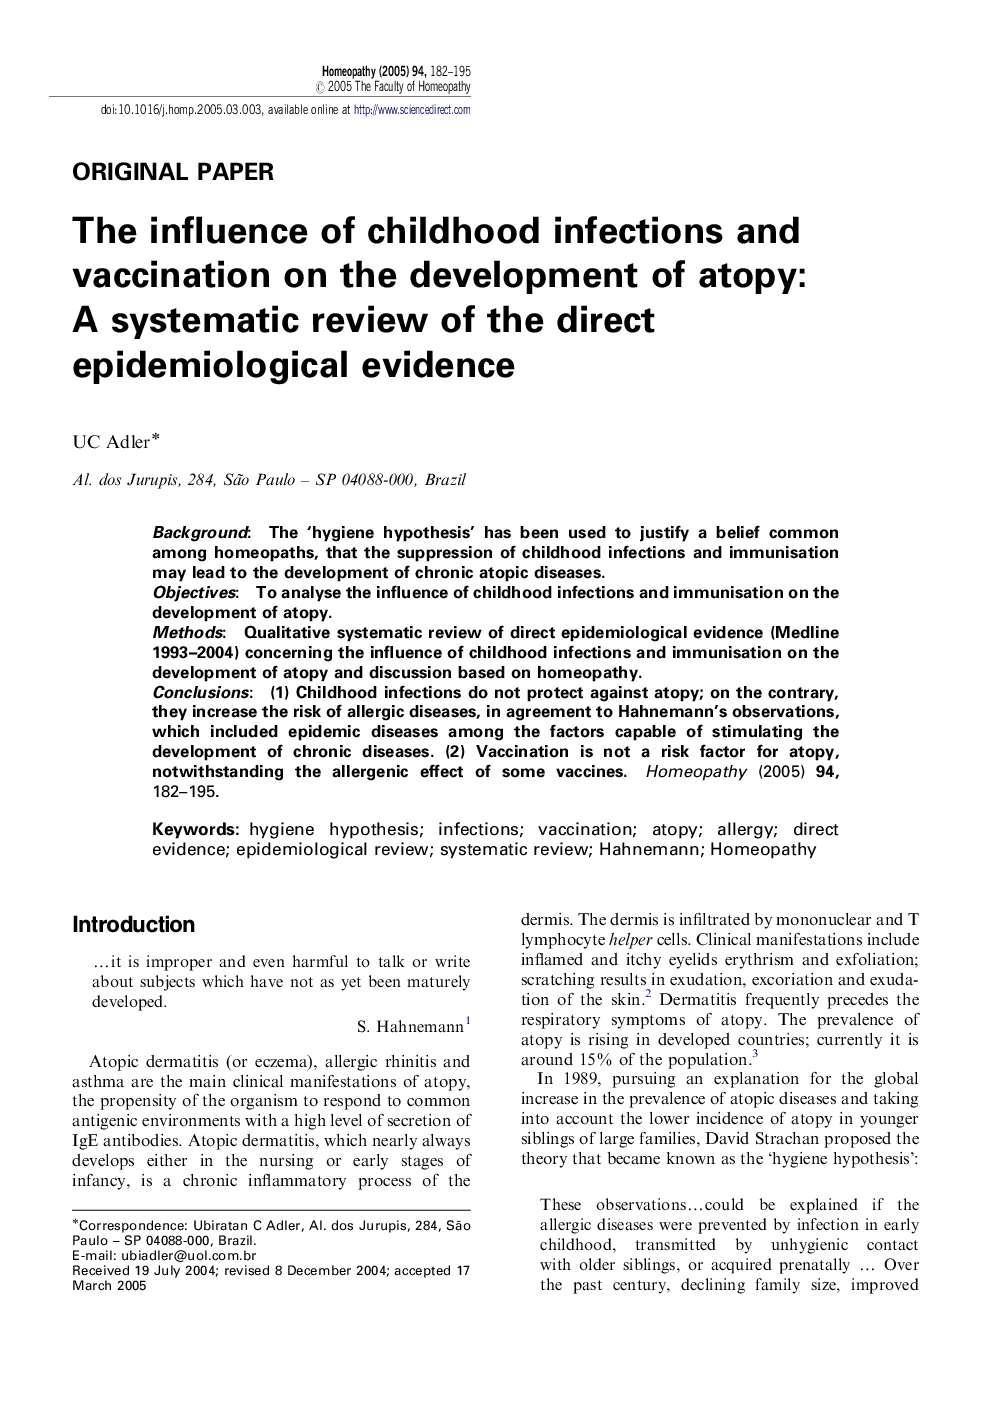 The influence of childhood infections and vaccination on the development of atopy: A systematic review of the direct epidemiological evidence